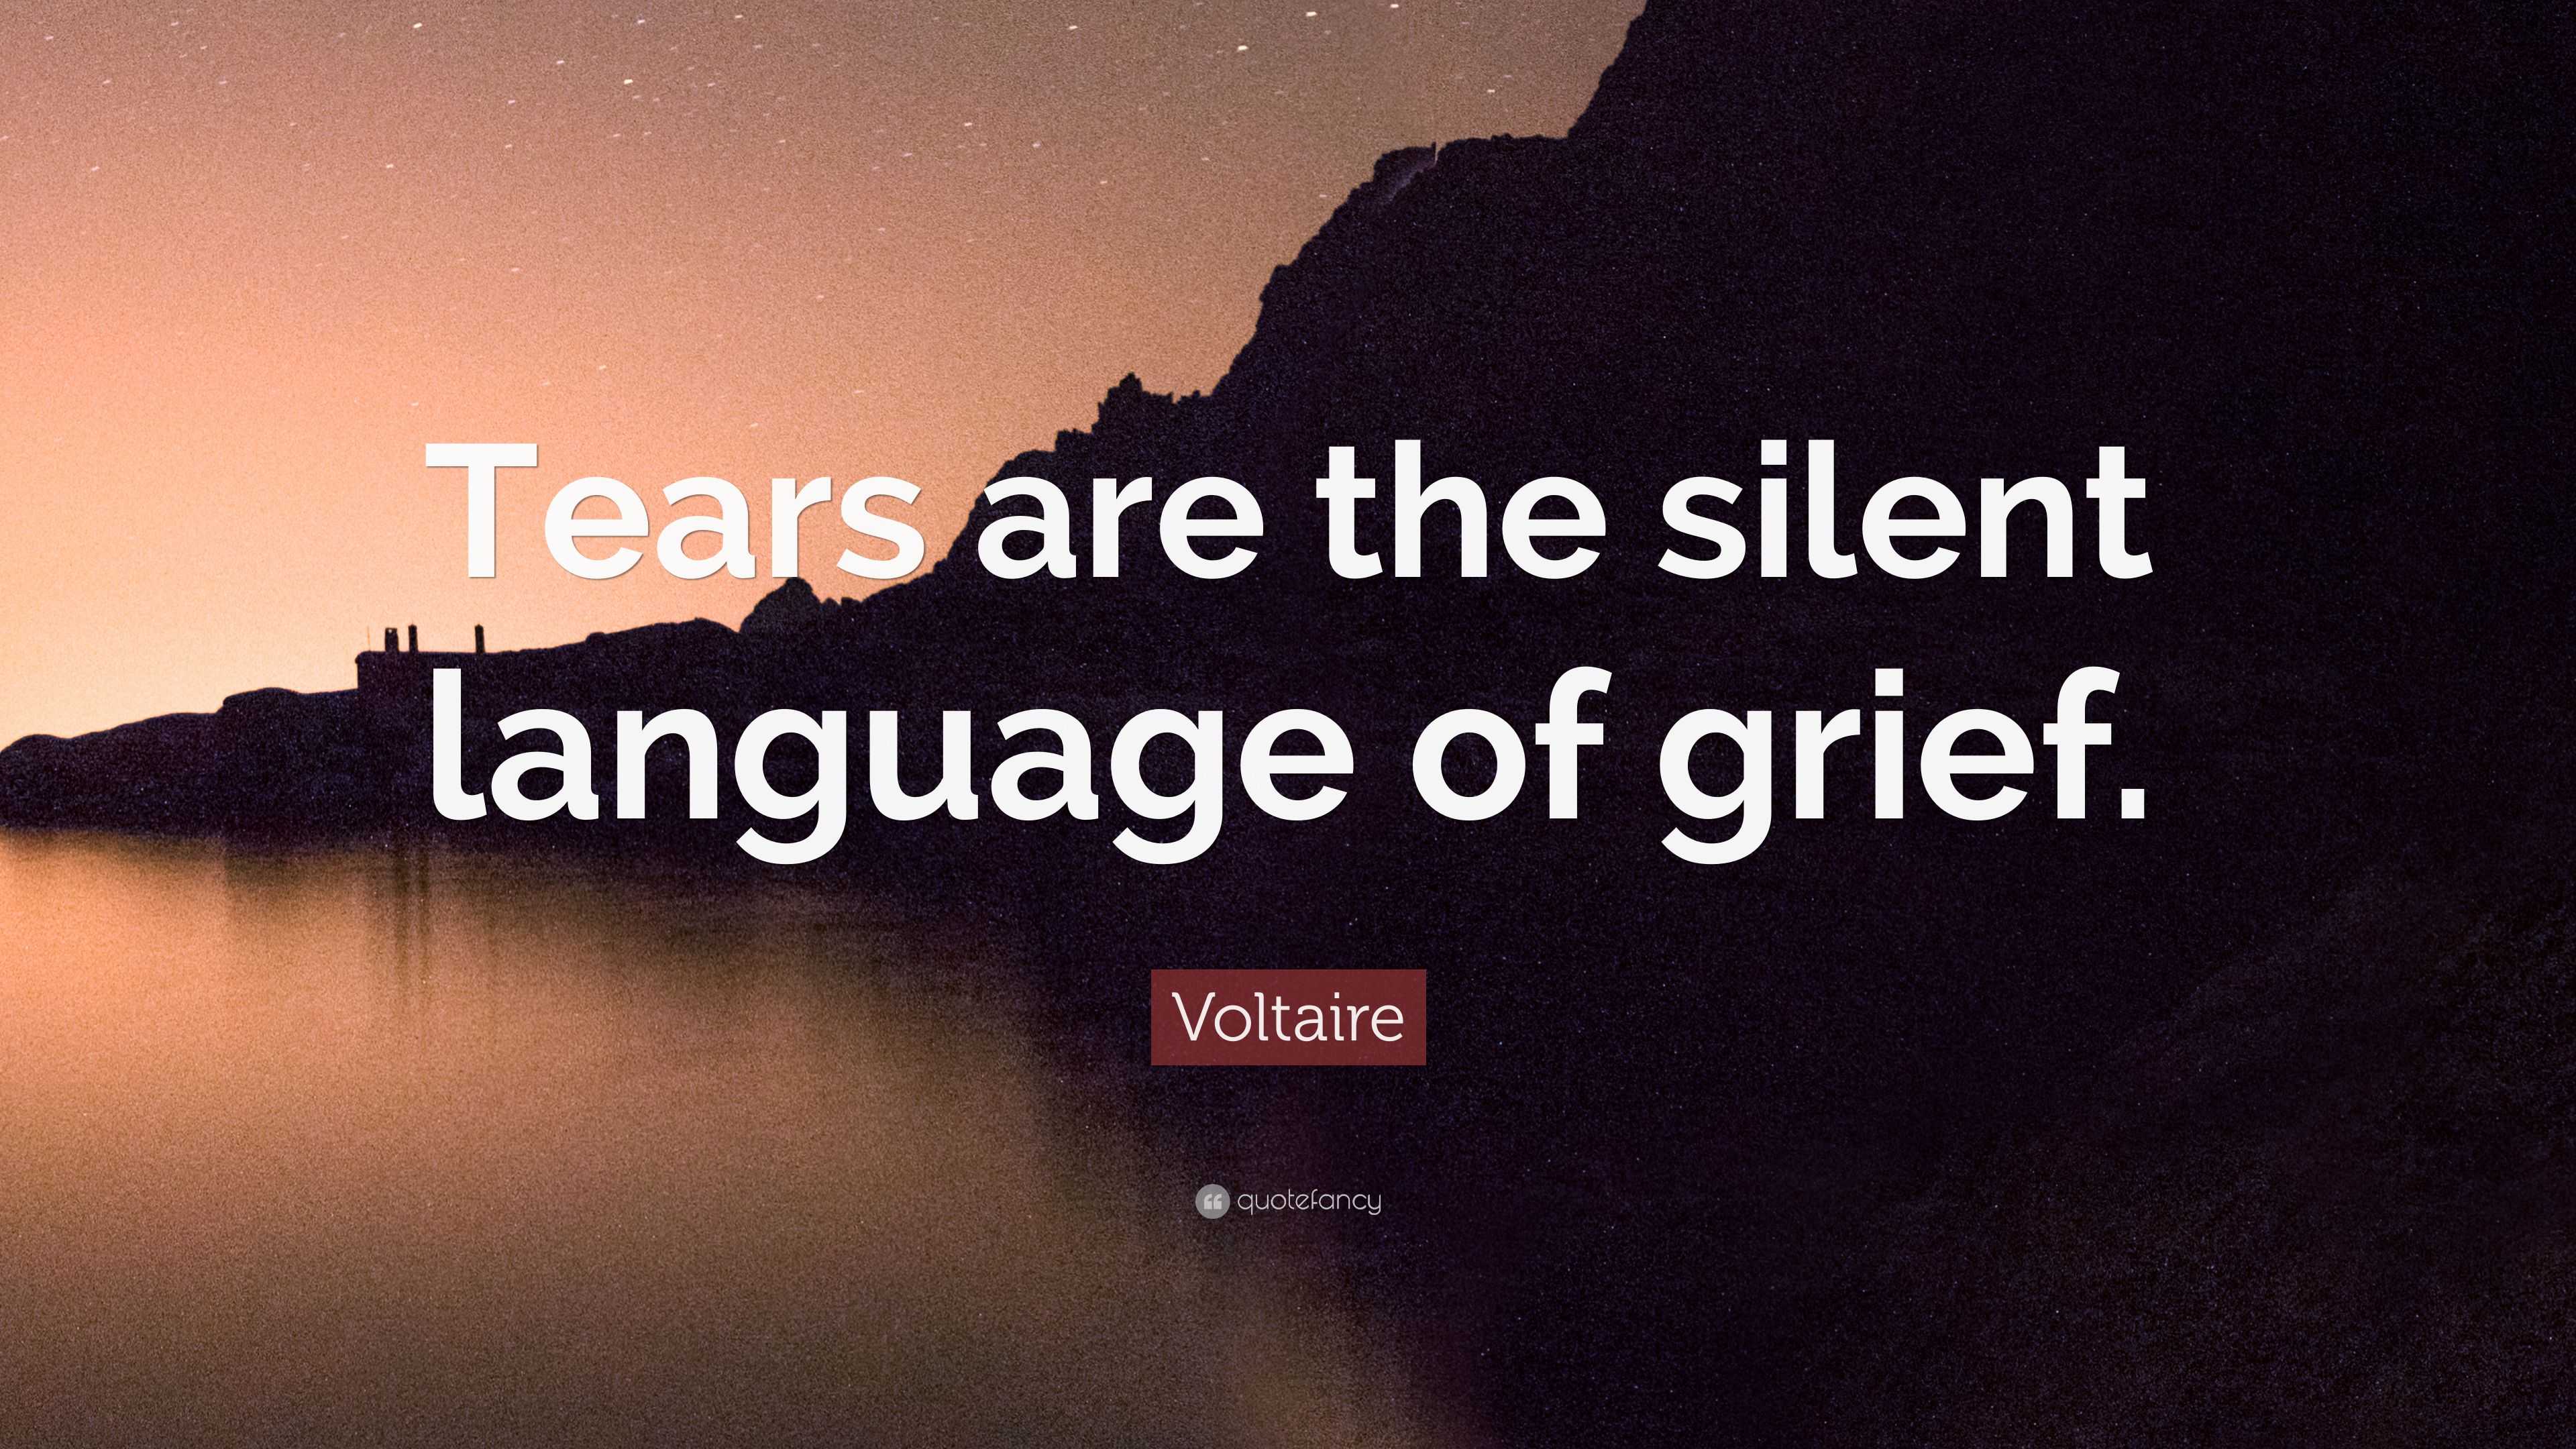 Voltaire Quote: "Tears are the silent language of grief ...